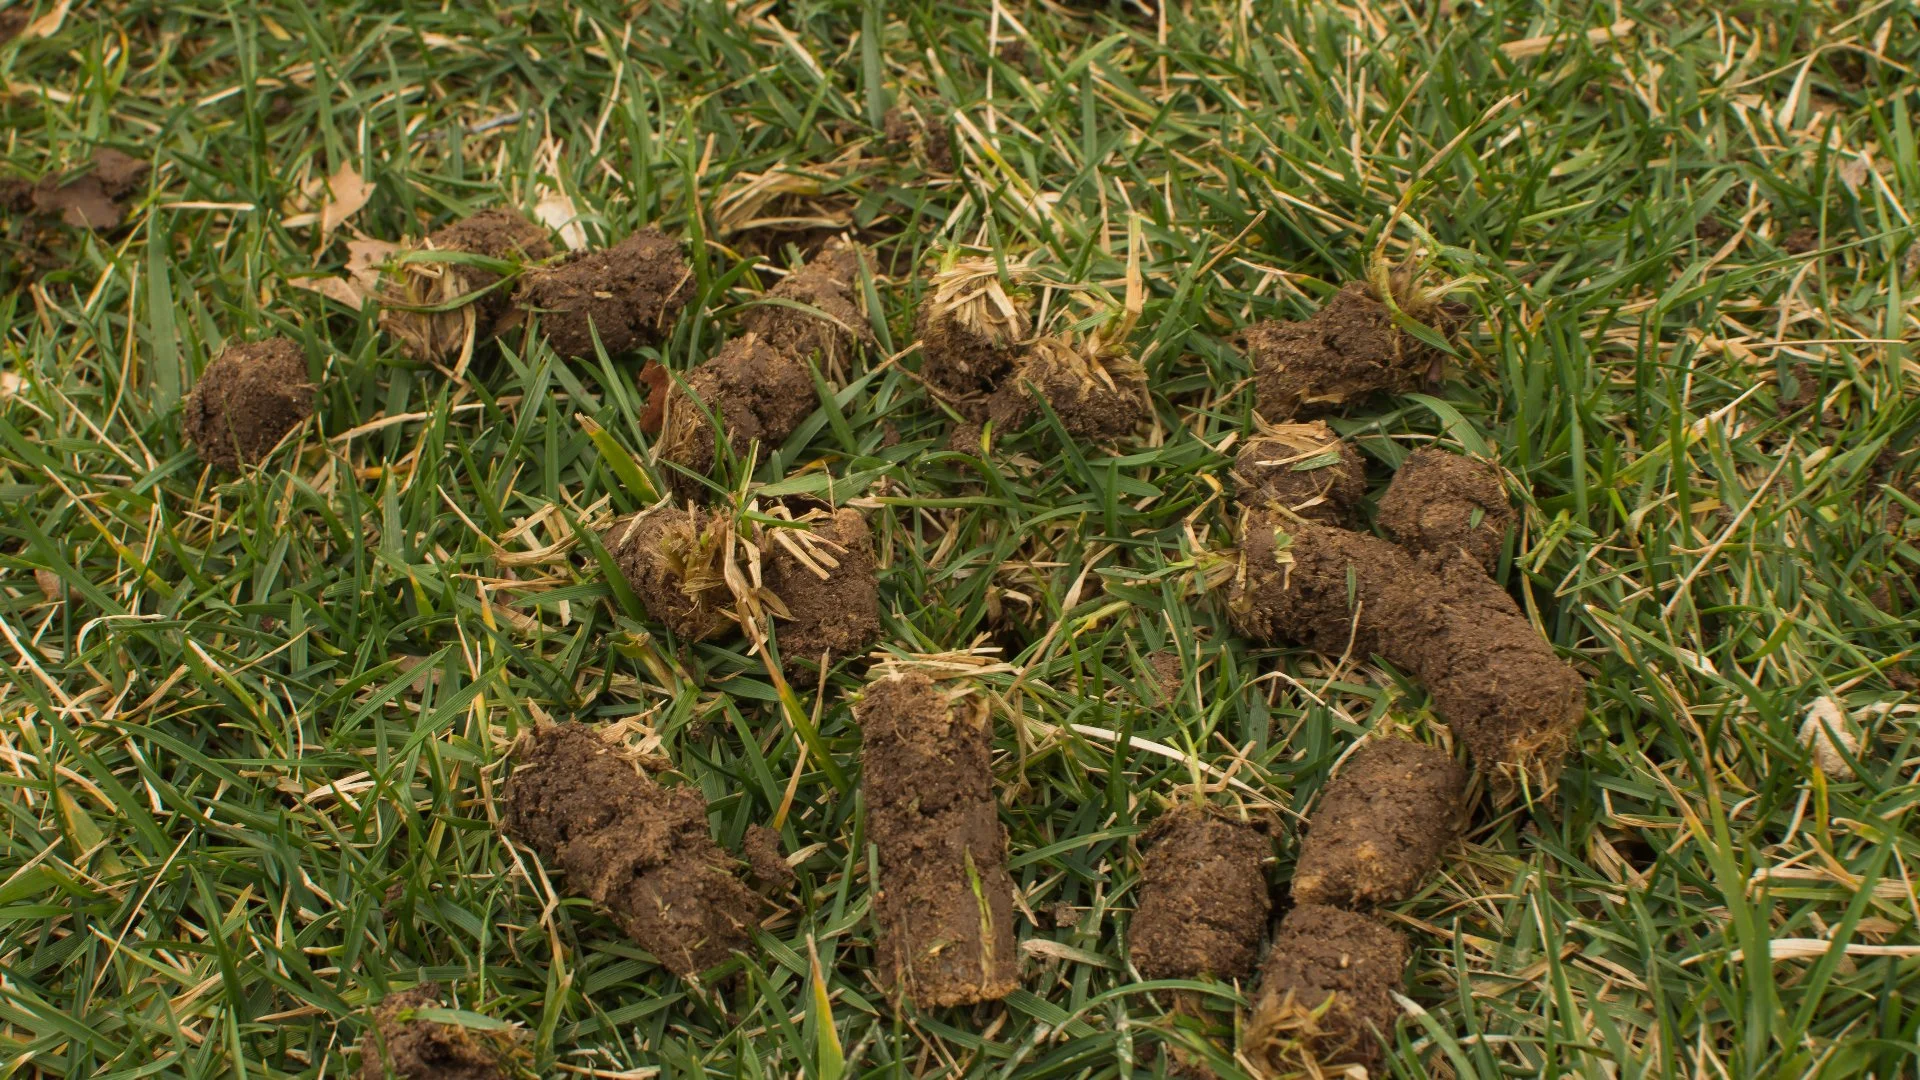 My Lawn Was Aerated & Now There Are Clumps of Soil on It - Why?